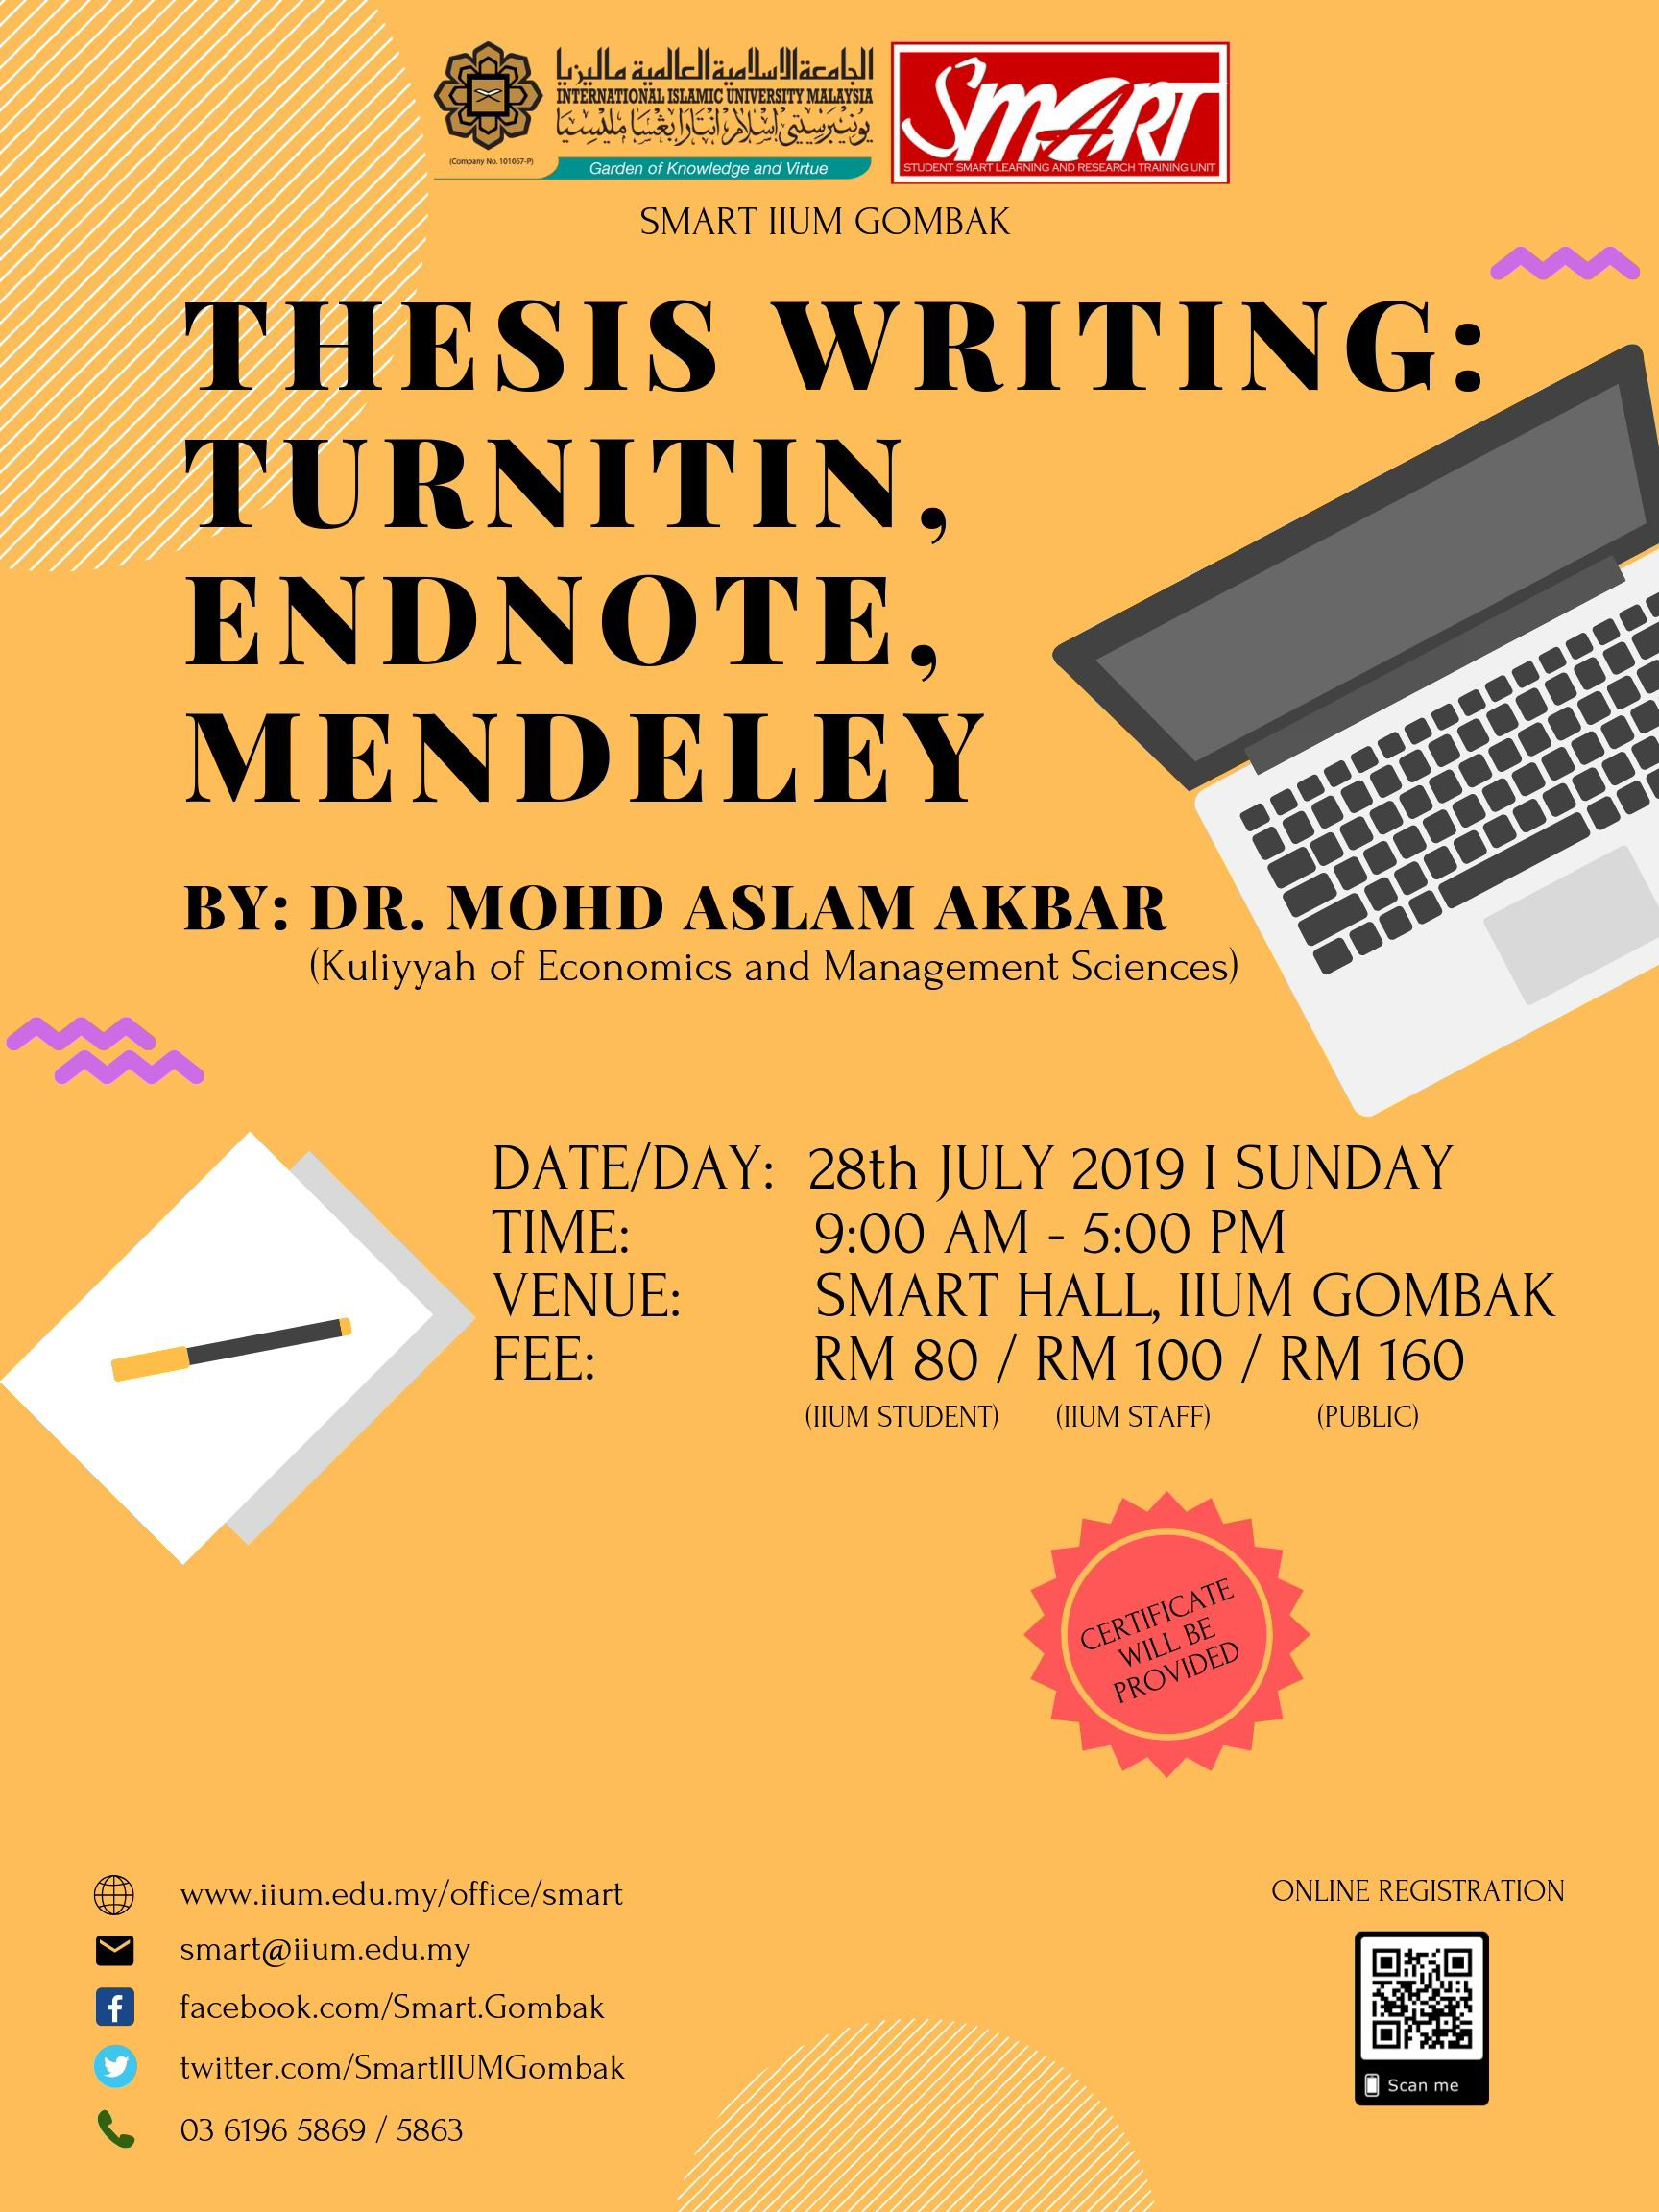 WORKSHOP : THESIS WRITING : TURNITIN, ENDNOTE, MENDELEY